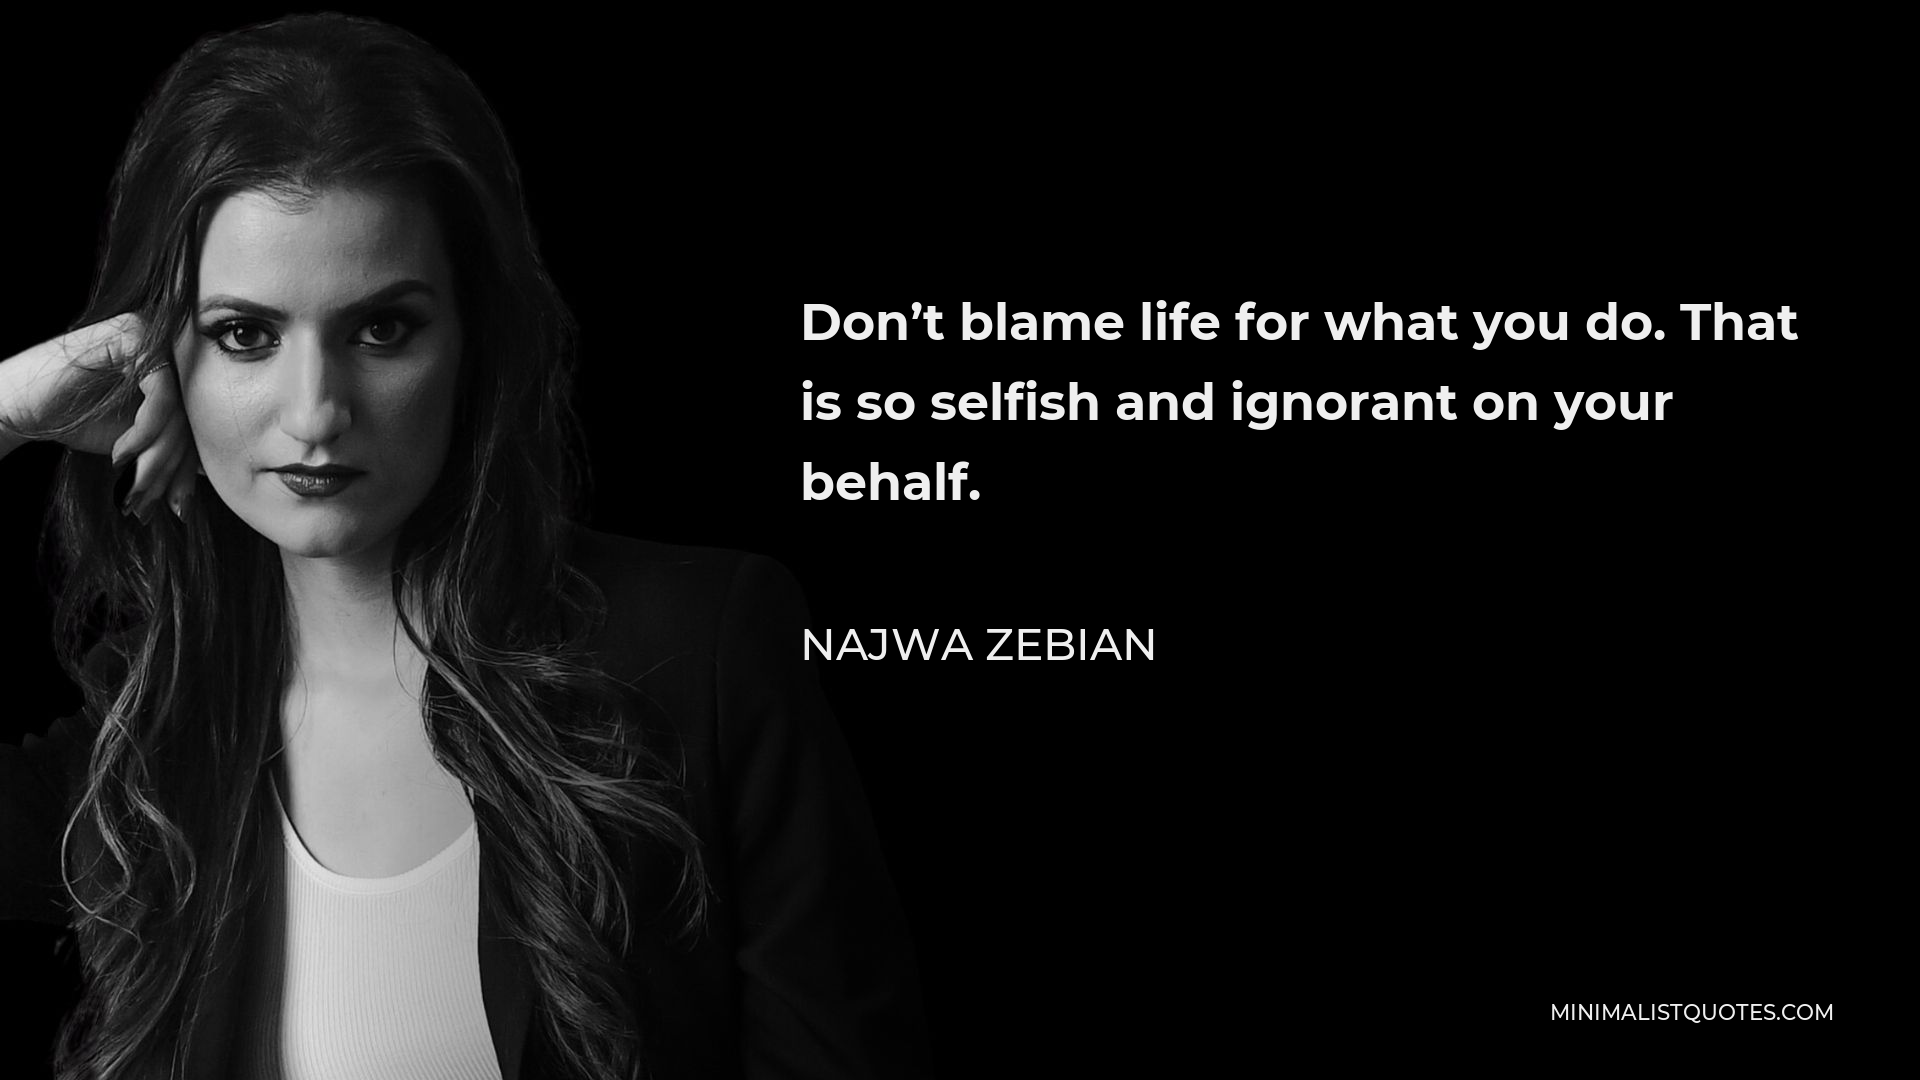 Najwa Zebian Quote - Don’t blame life for what you do. That is so selfish and ignorant on your behalf.